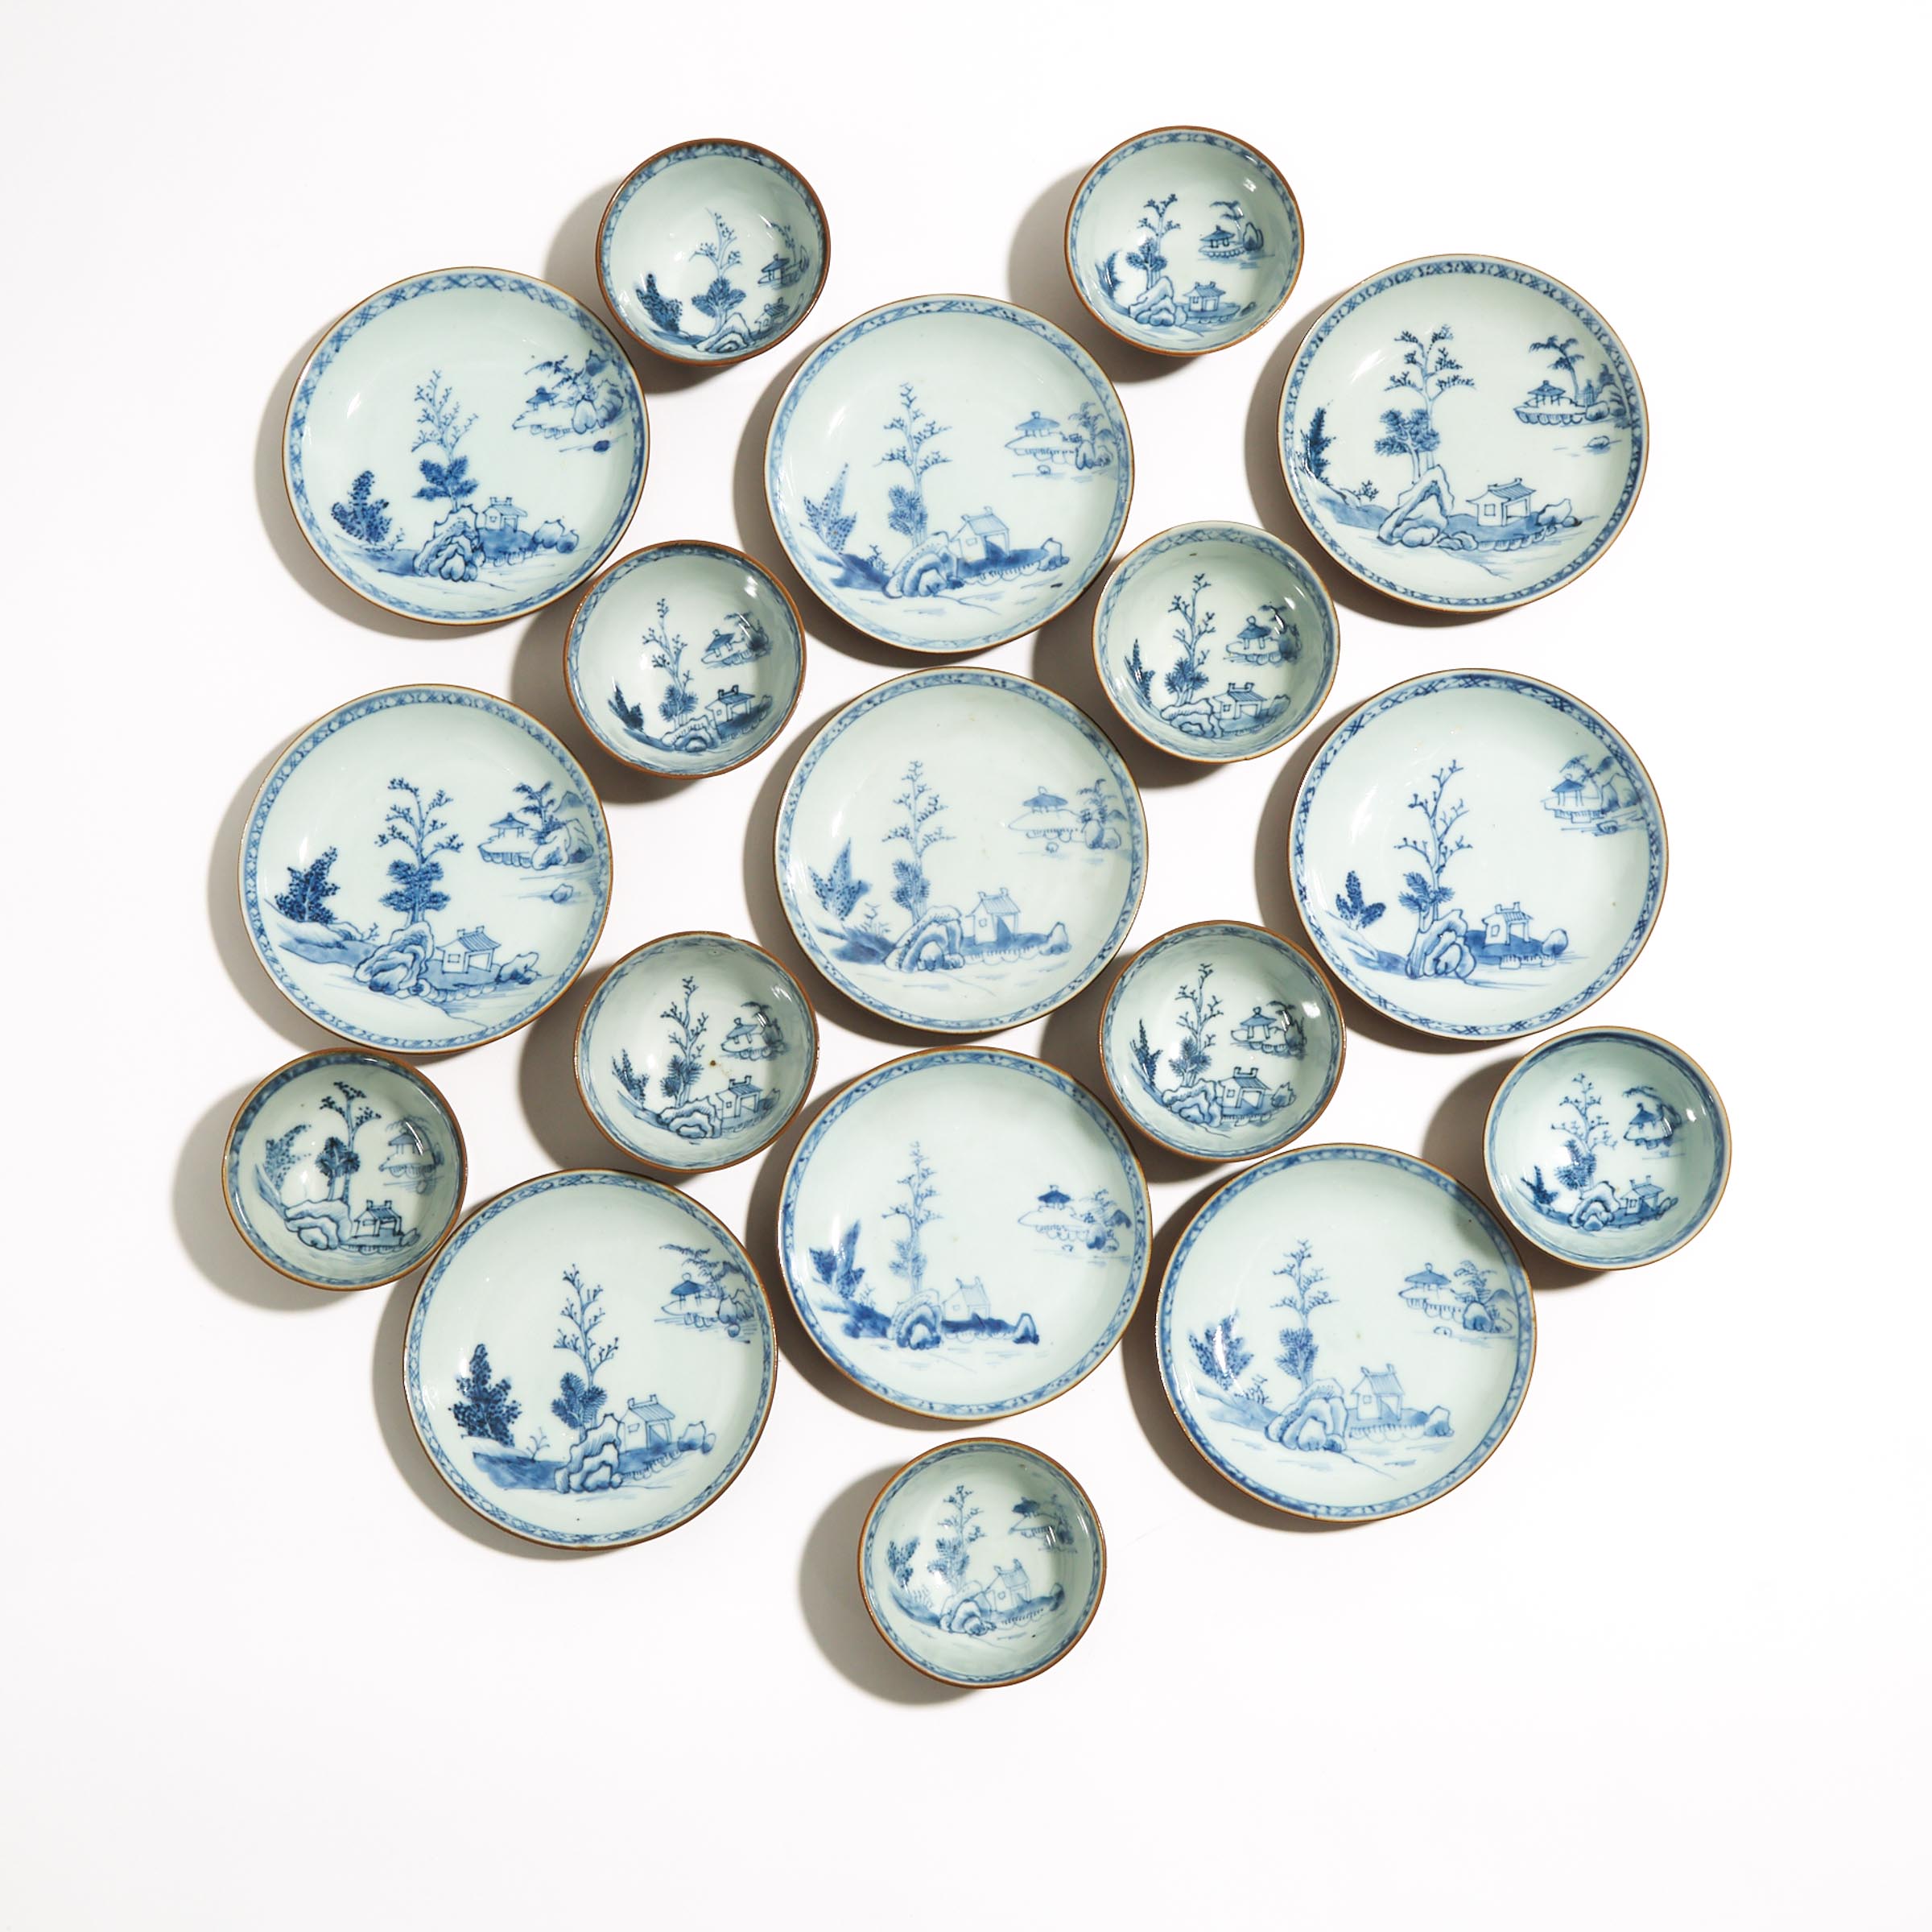 A Set of Eighteen 'Batavian Pavilion' Pattern Teabowls and Saucers from the Nanking Cargo, Qianlong Period, Circa 1750